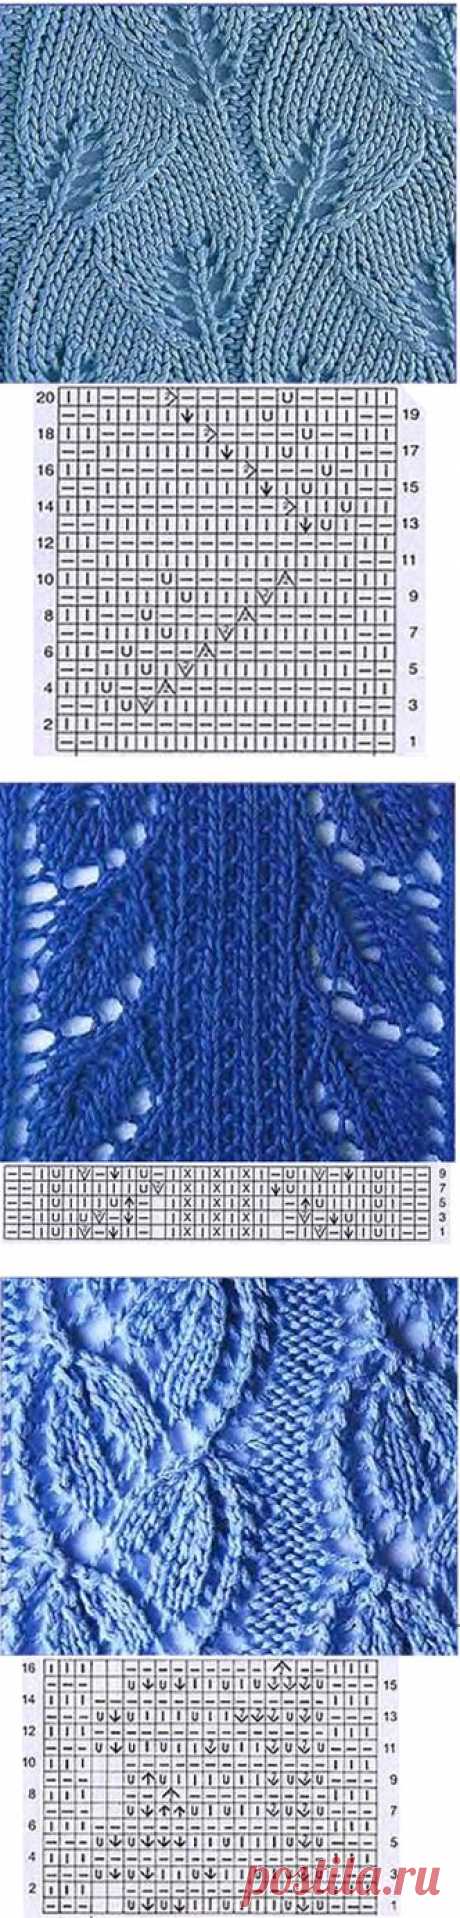 Leaf type Knitting pattern | TriCoT PoiNTs